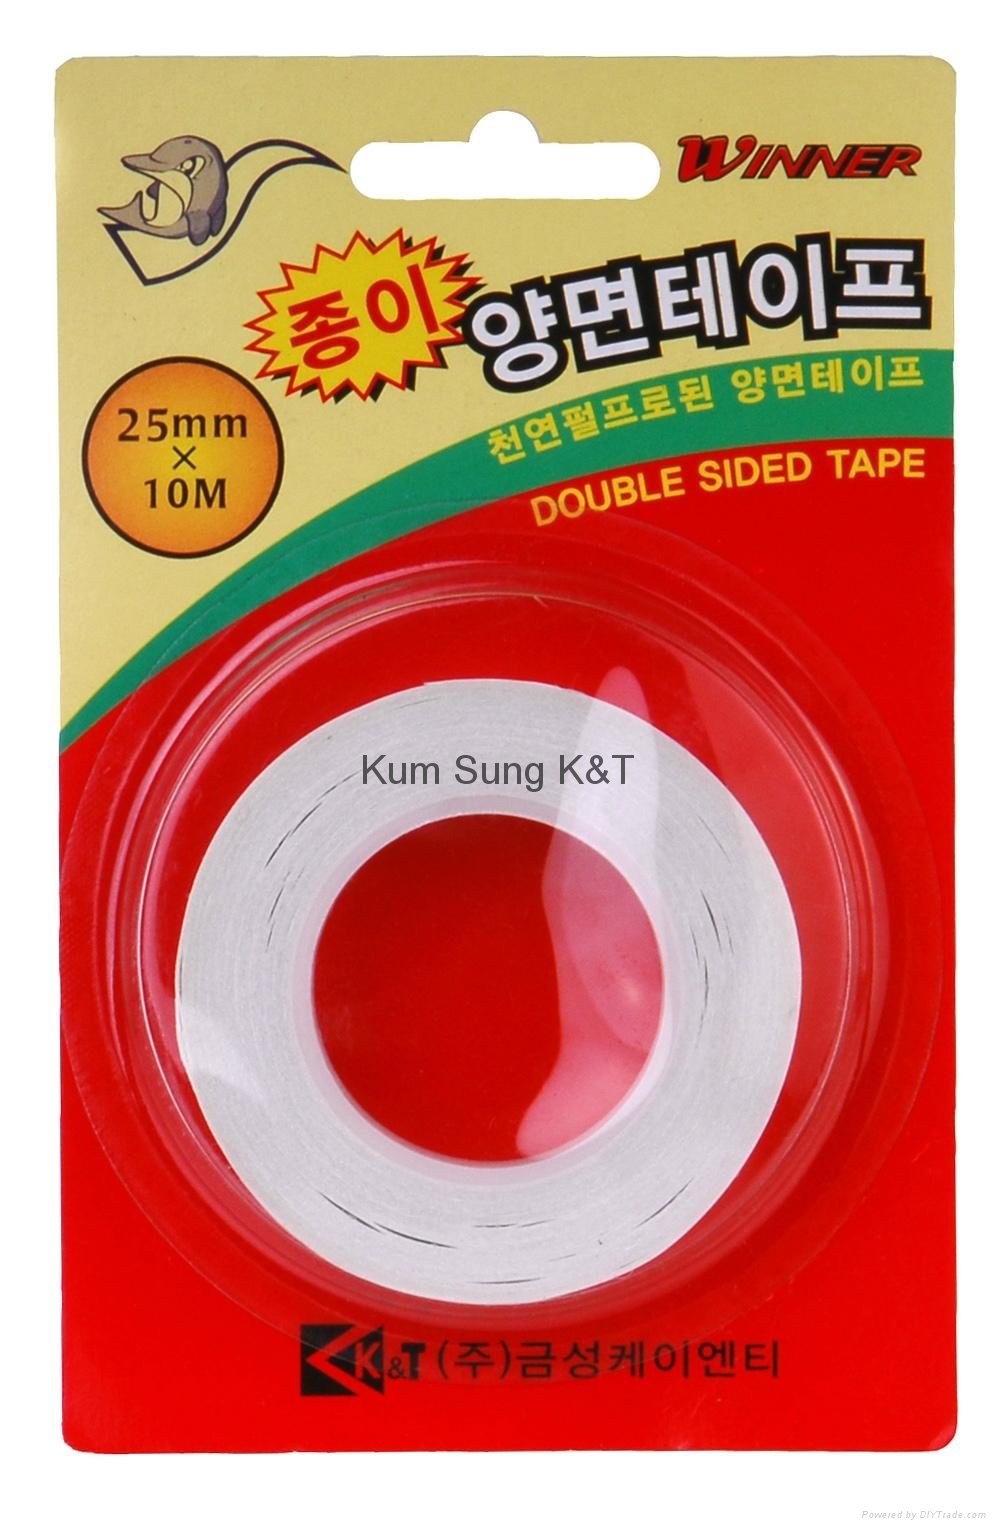 Double-sided Tissue Tape 3